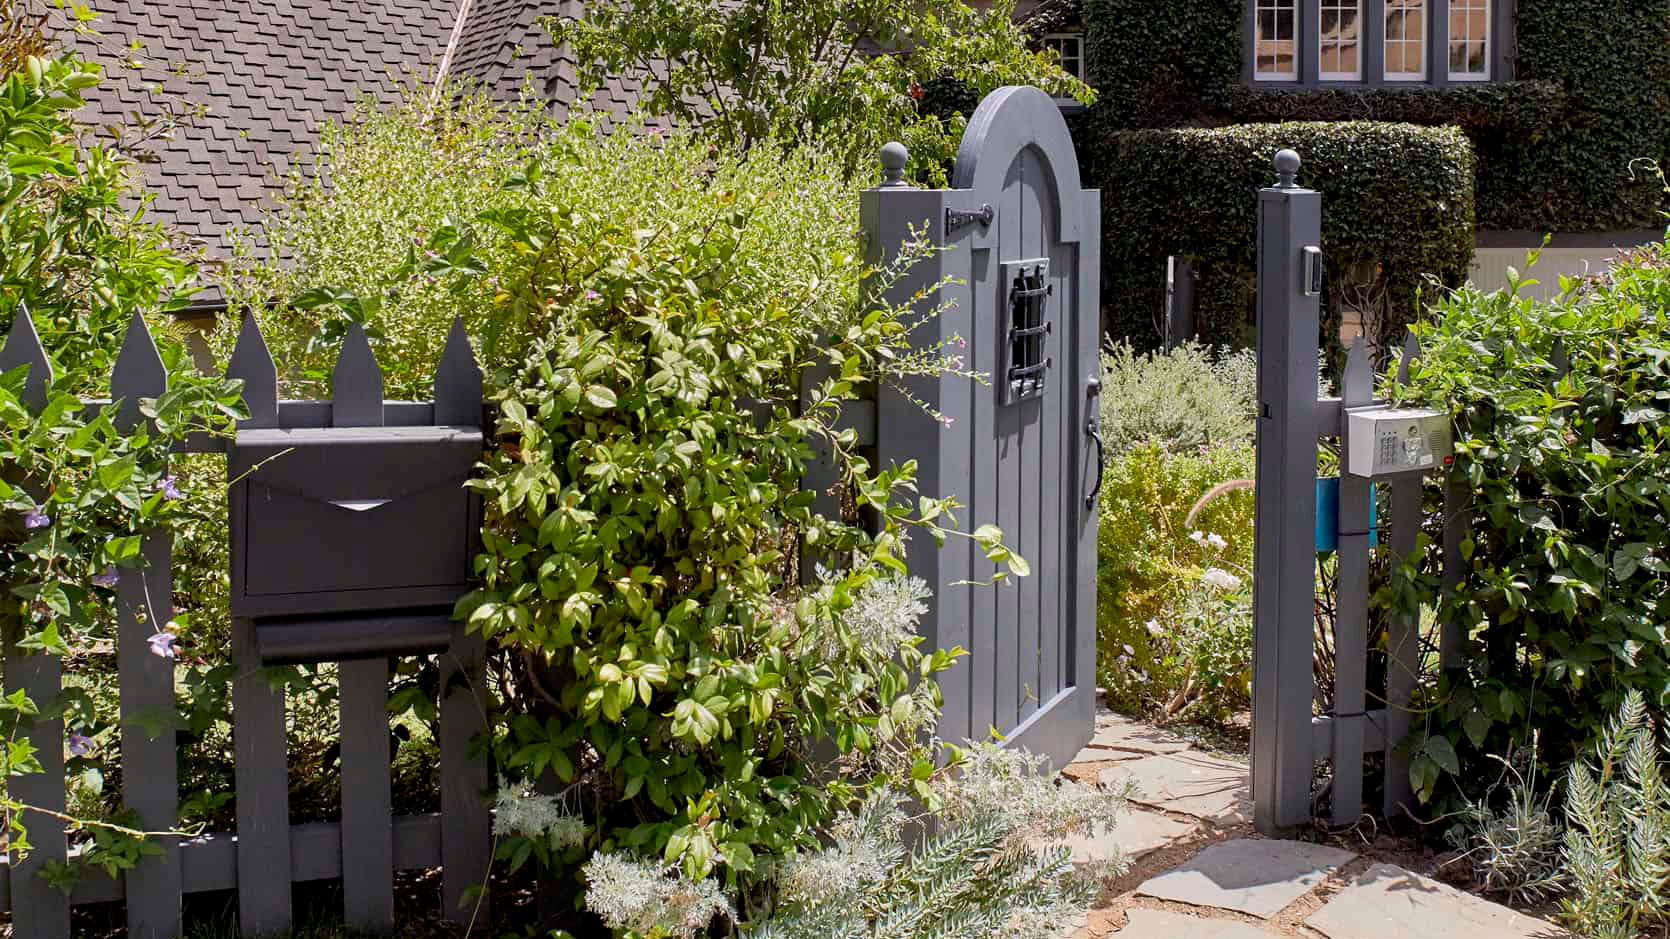 Mailbox landscaping ideas – 10 ways to add curb appeal to your front yard